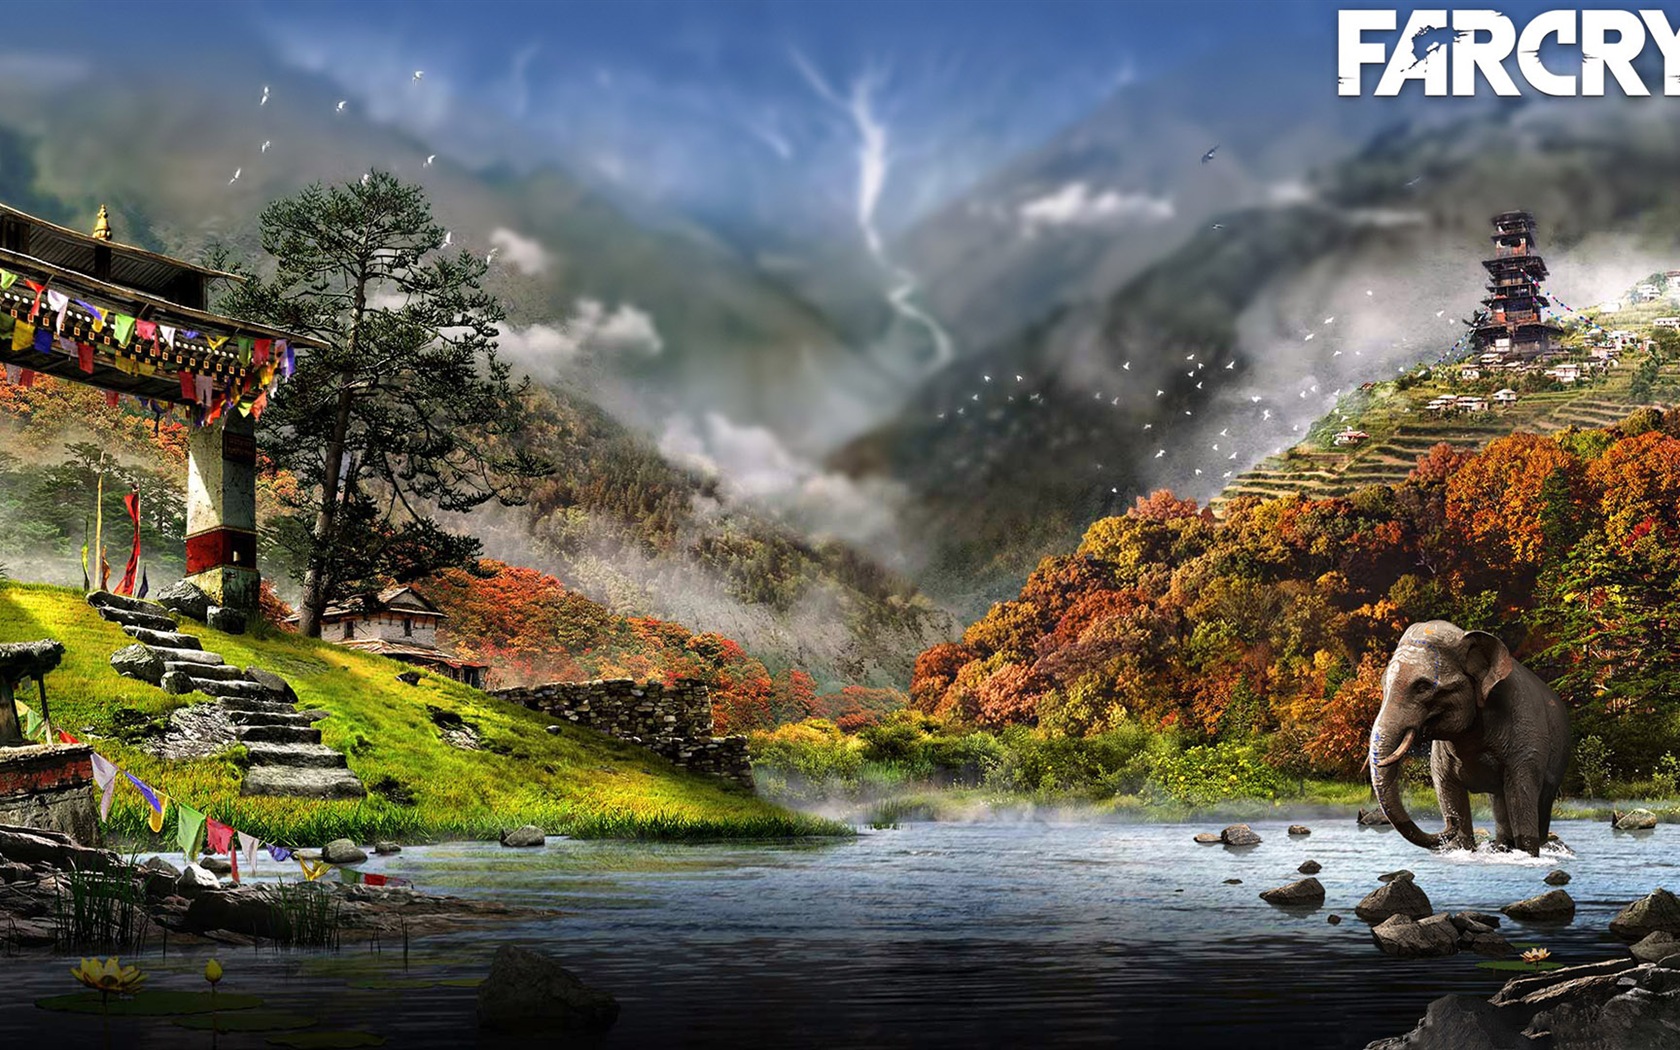 Far Cry 4 HD game wallpapers #13 - 1680x1050